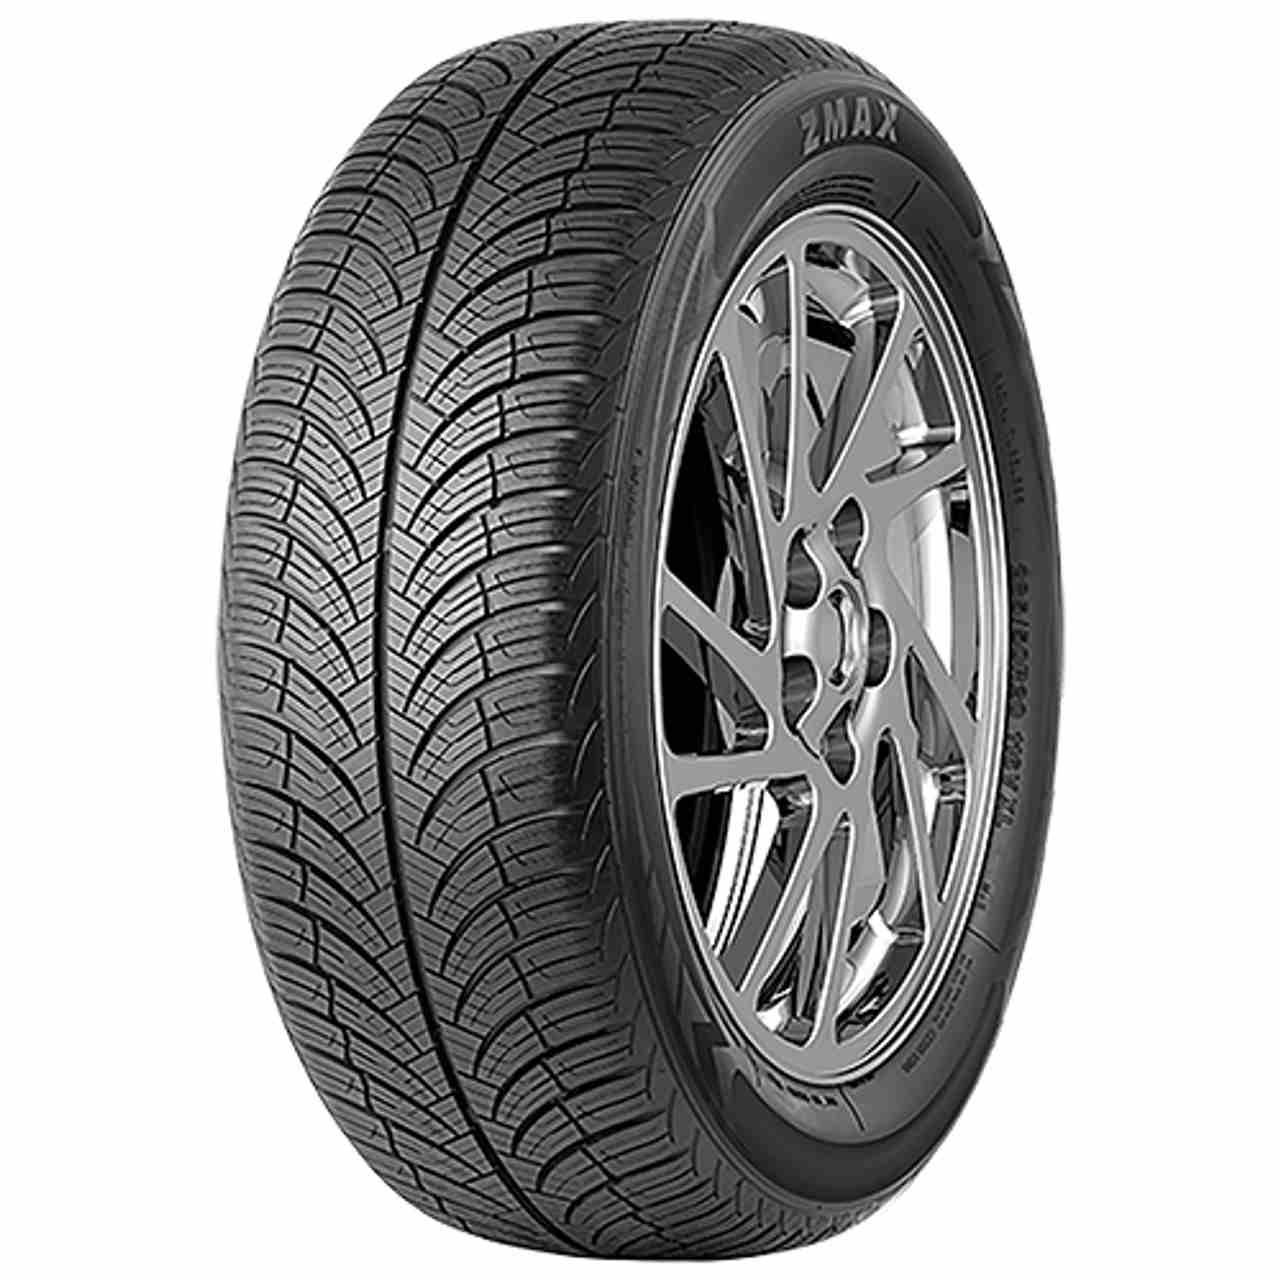 ZMAX X-SPIDER A/S 225/55R19 99V BSW